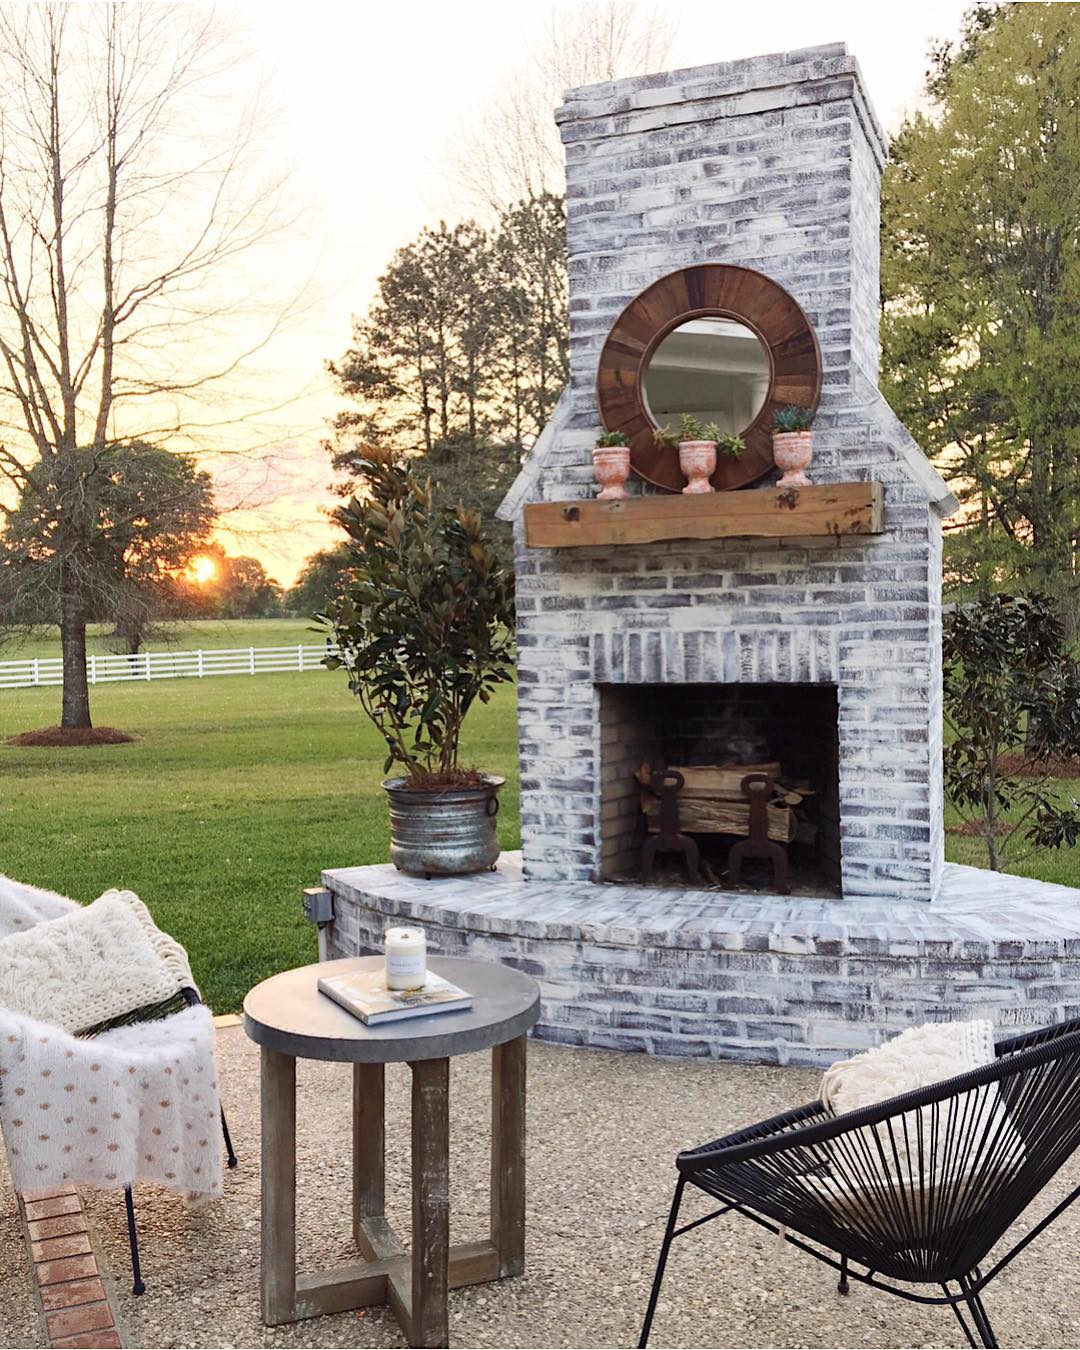 outdoor fireplace installed in the backyard with seating in front photo by Instagram user @cindimc.ivoryhomedesign